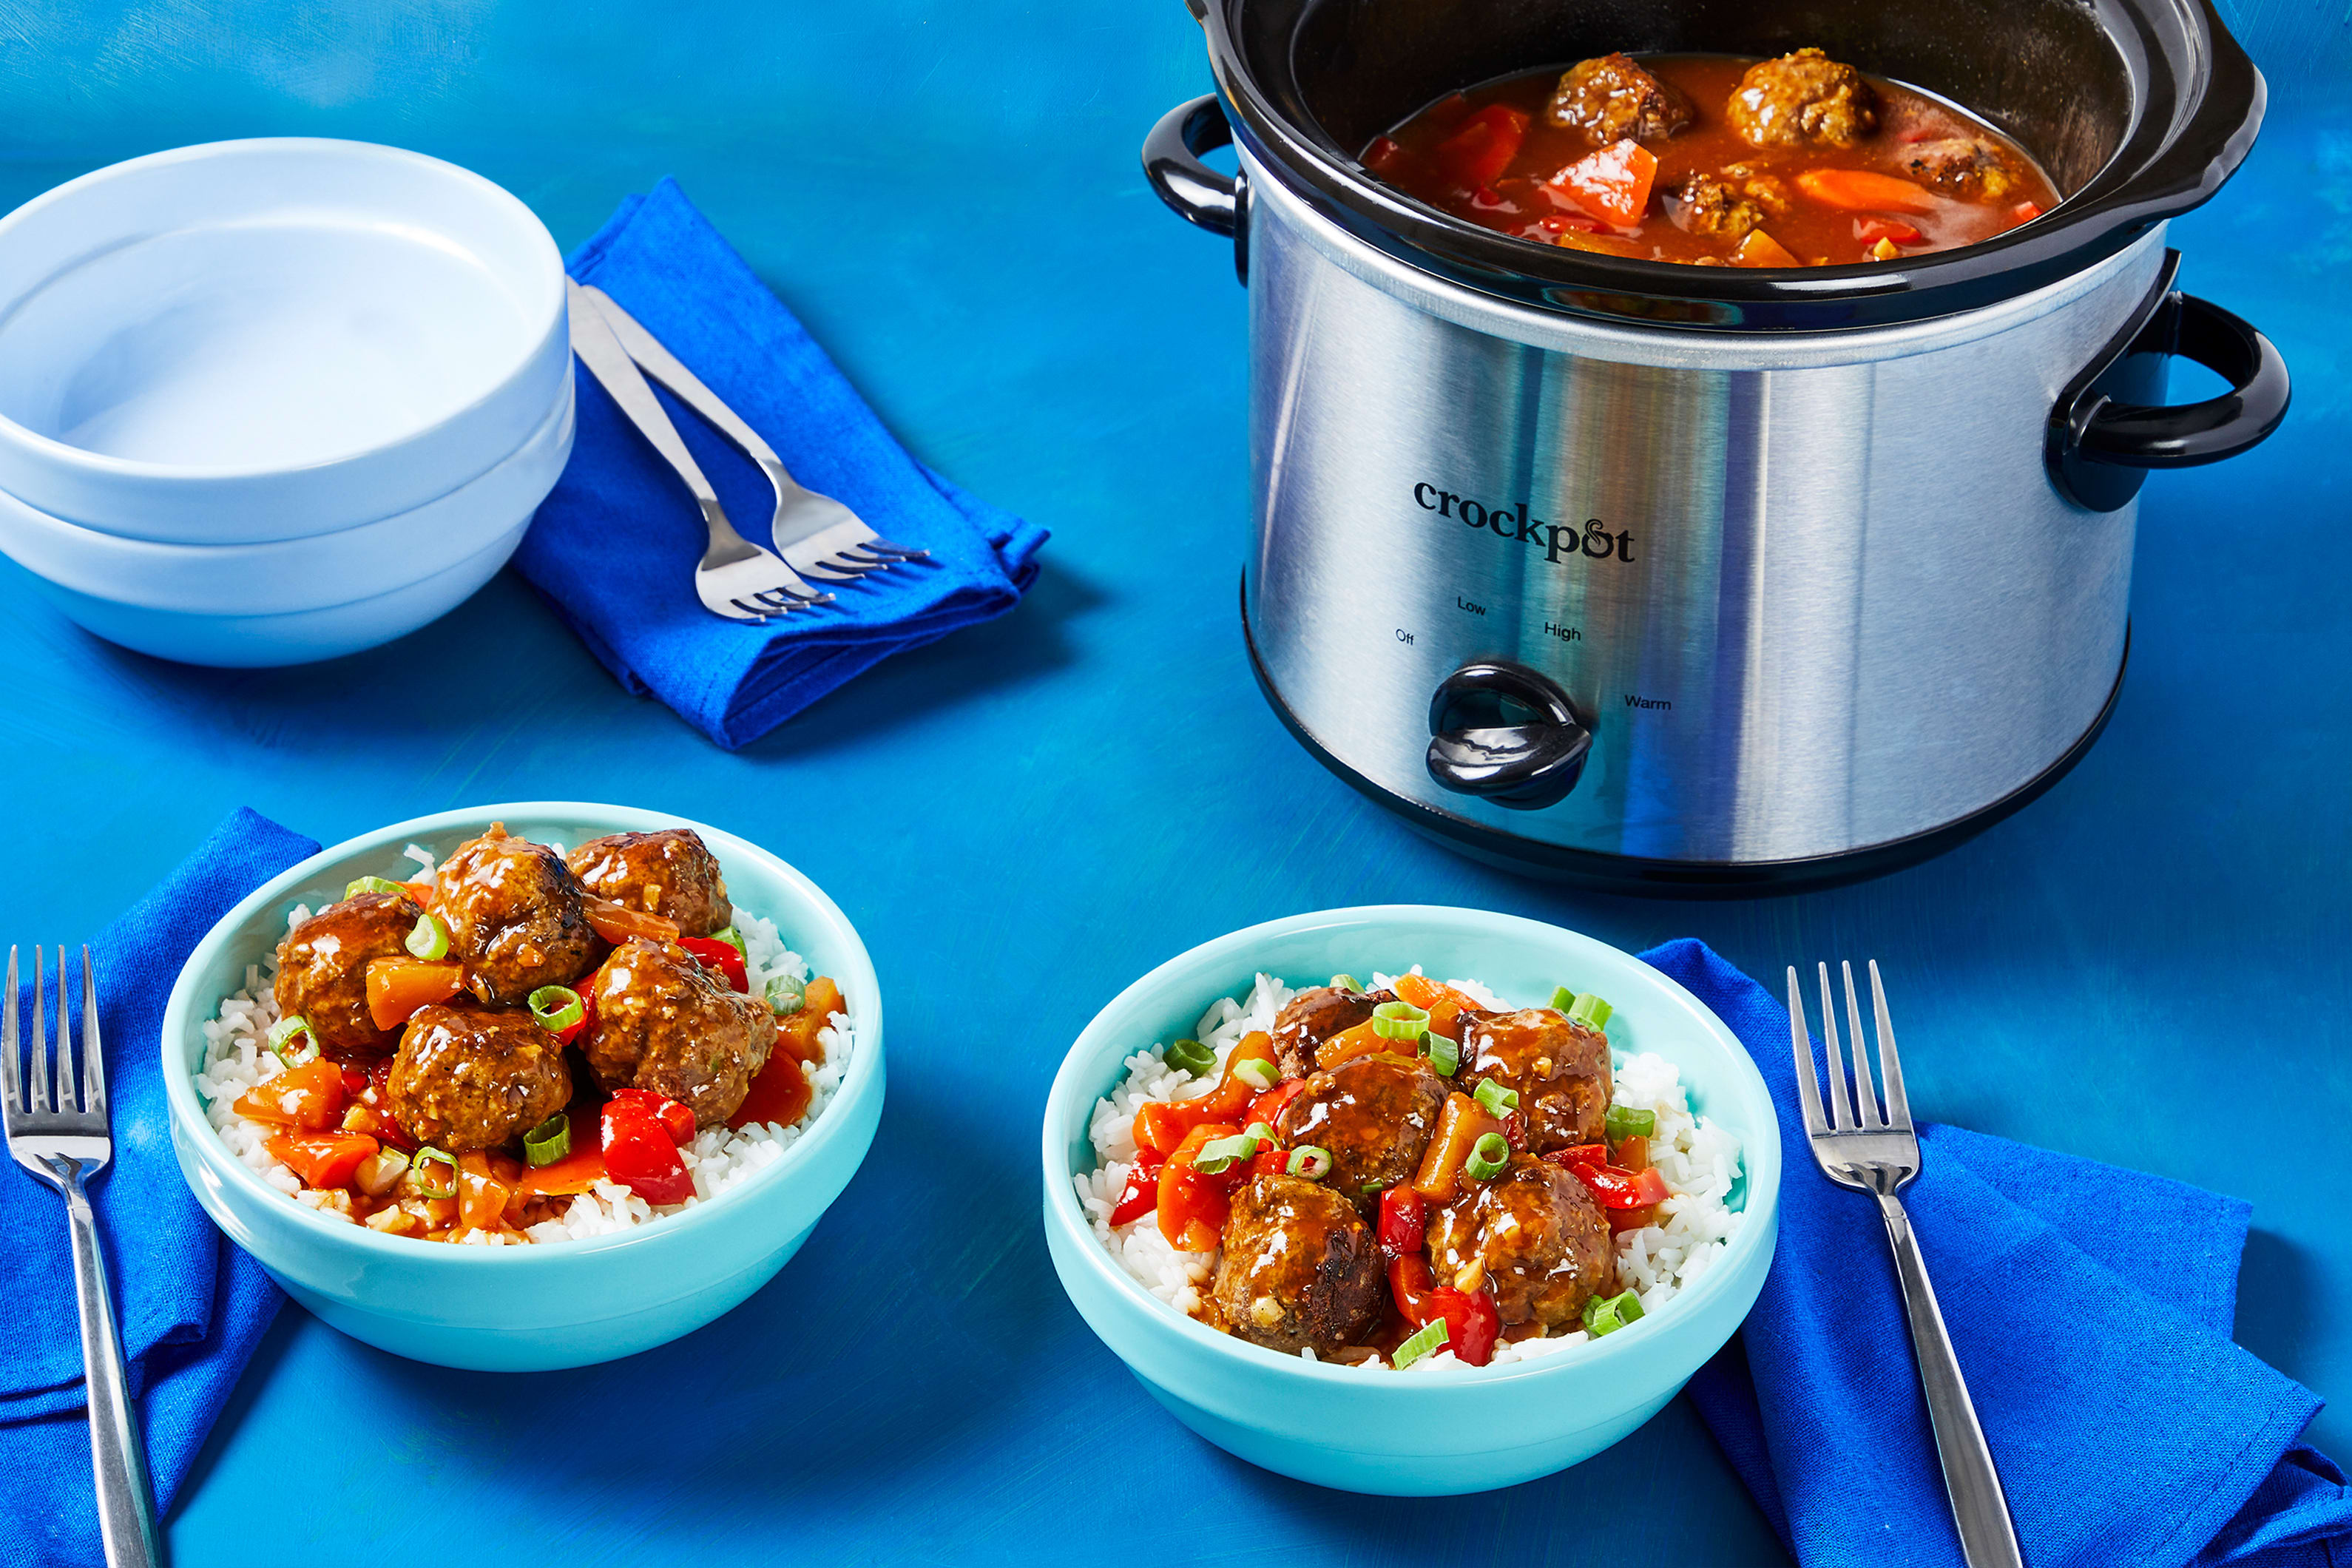 https://images.everyplate.com/f_auto,fl_lossy,q_auto/everyplate_s3/image/slow-cooker-sweet-sour-beef-meatballs-05c34a8a.jpg